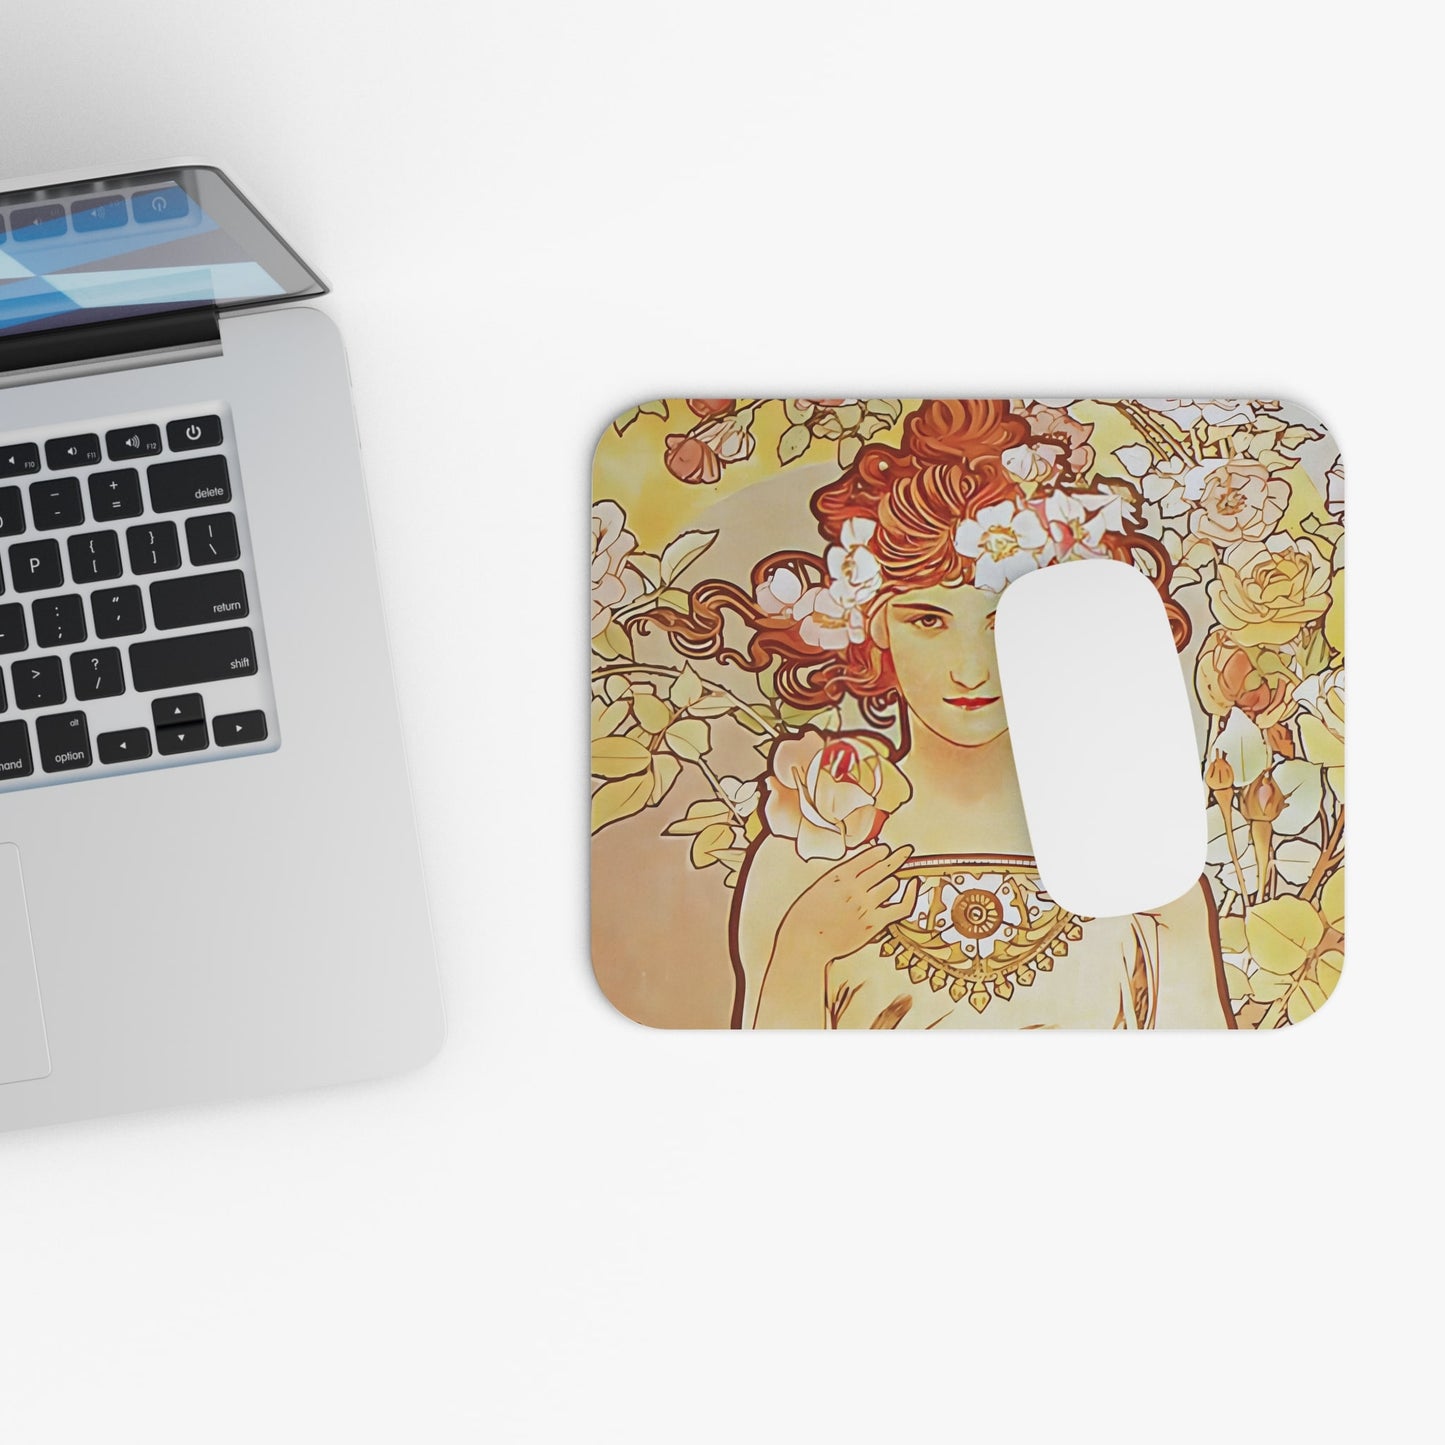 Vintage Bohemian Flower Design Laptop Mouse Pad with White Mouse